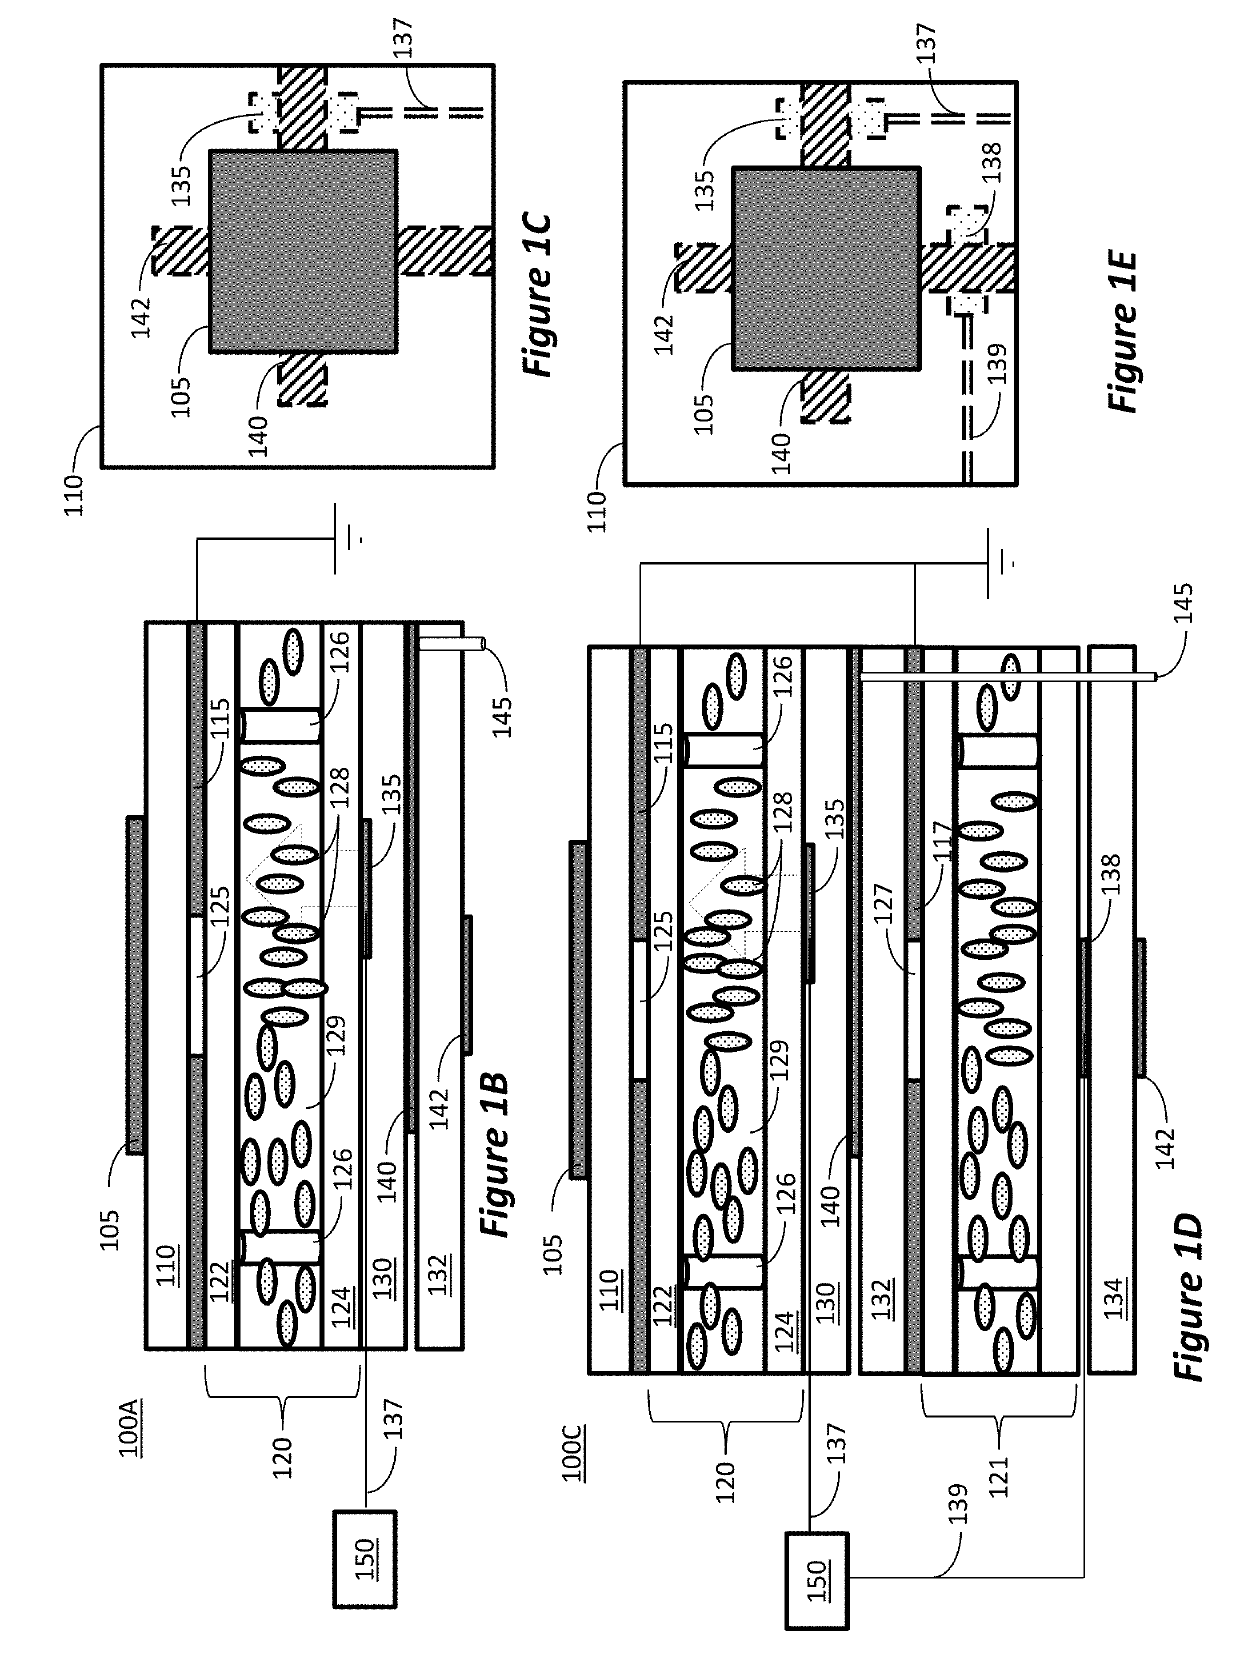 Polymer dispersed/shear aligned phase modulator device